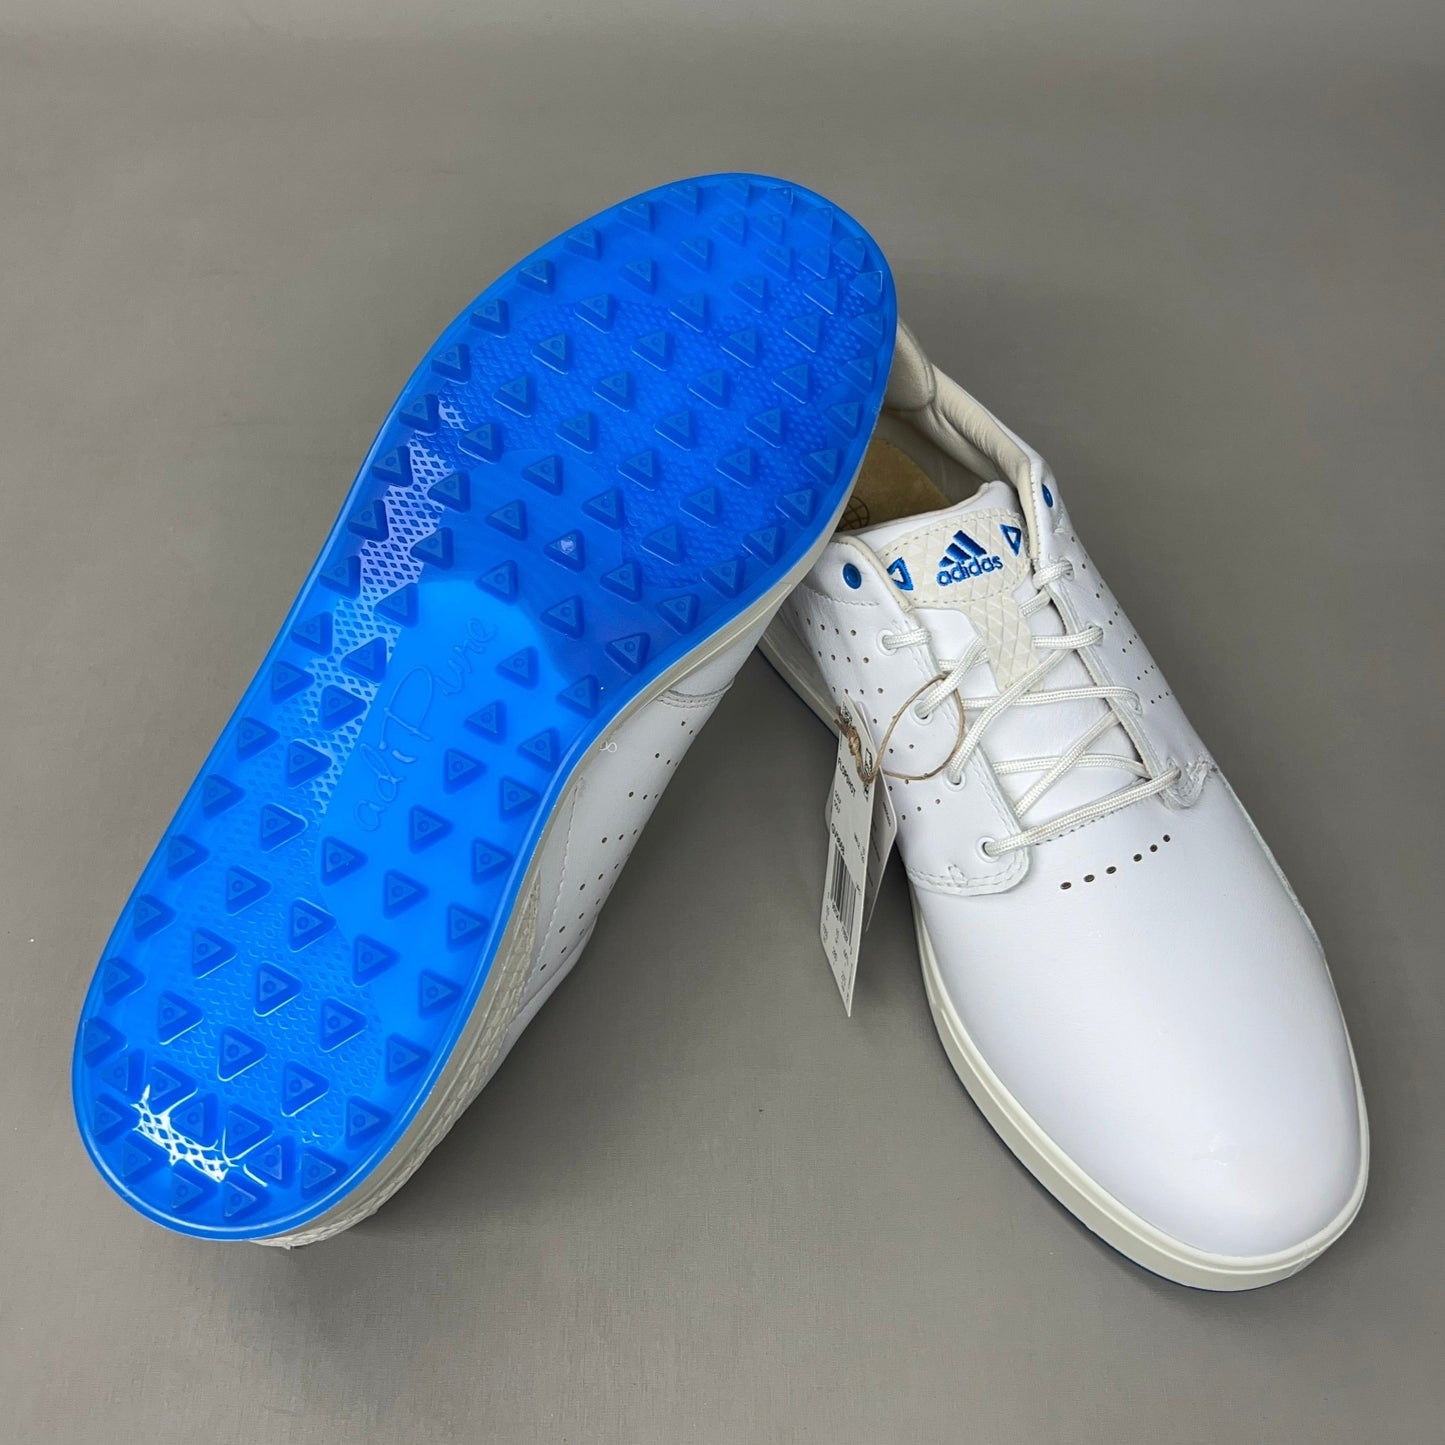 ADIDAS Flopshot Golf Shoes Waterproof Leather Men's Sz 13 White / Gold / Blue GV9668 (New)